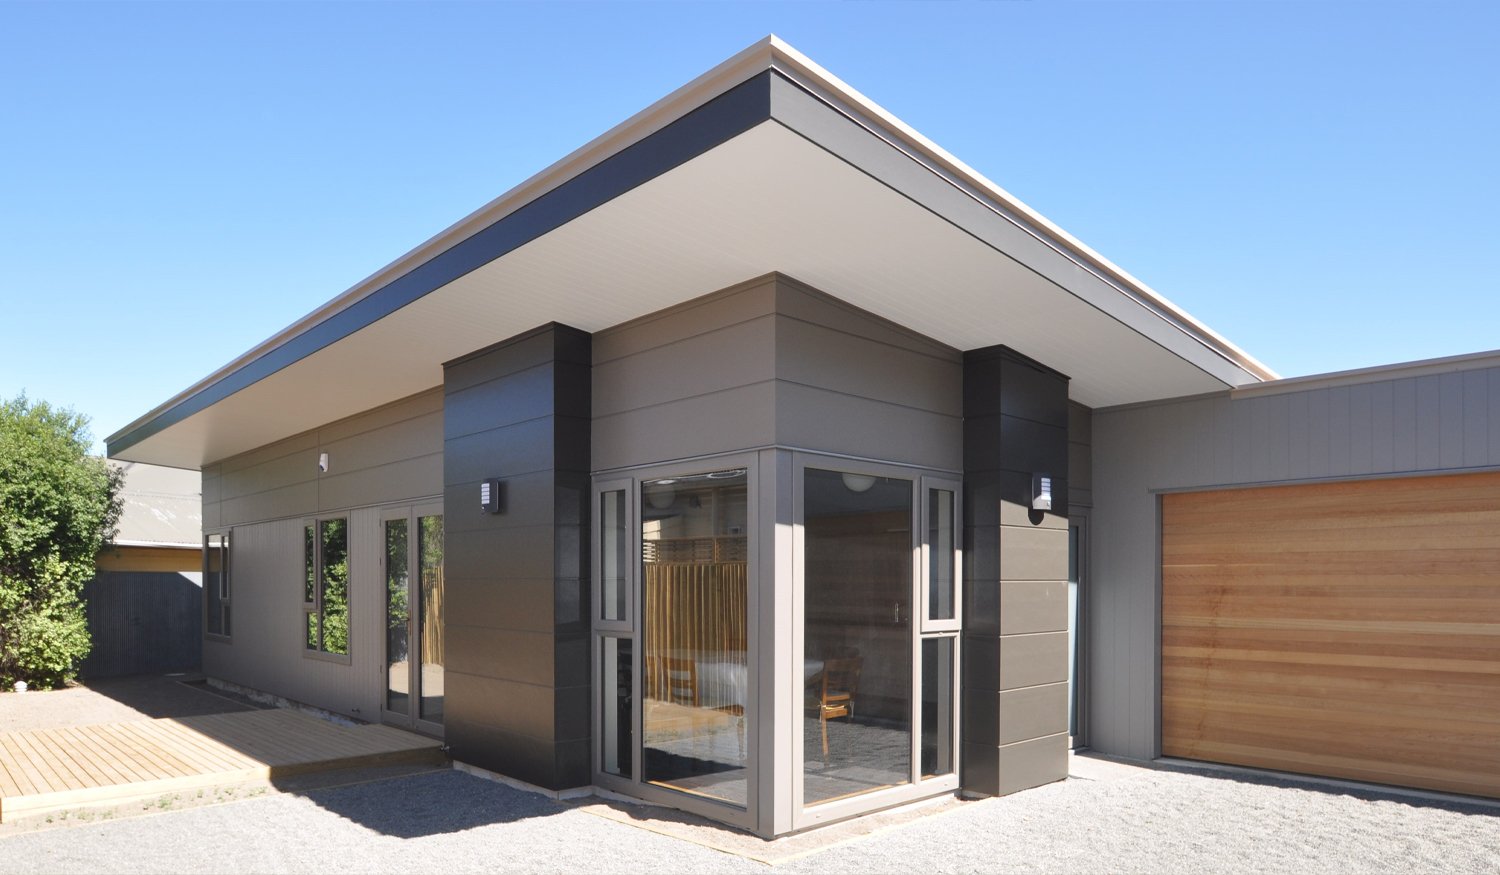 Modern grey, black and wooden house with grey uPVC window and door frames